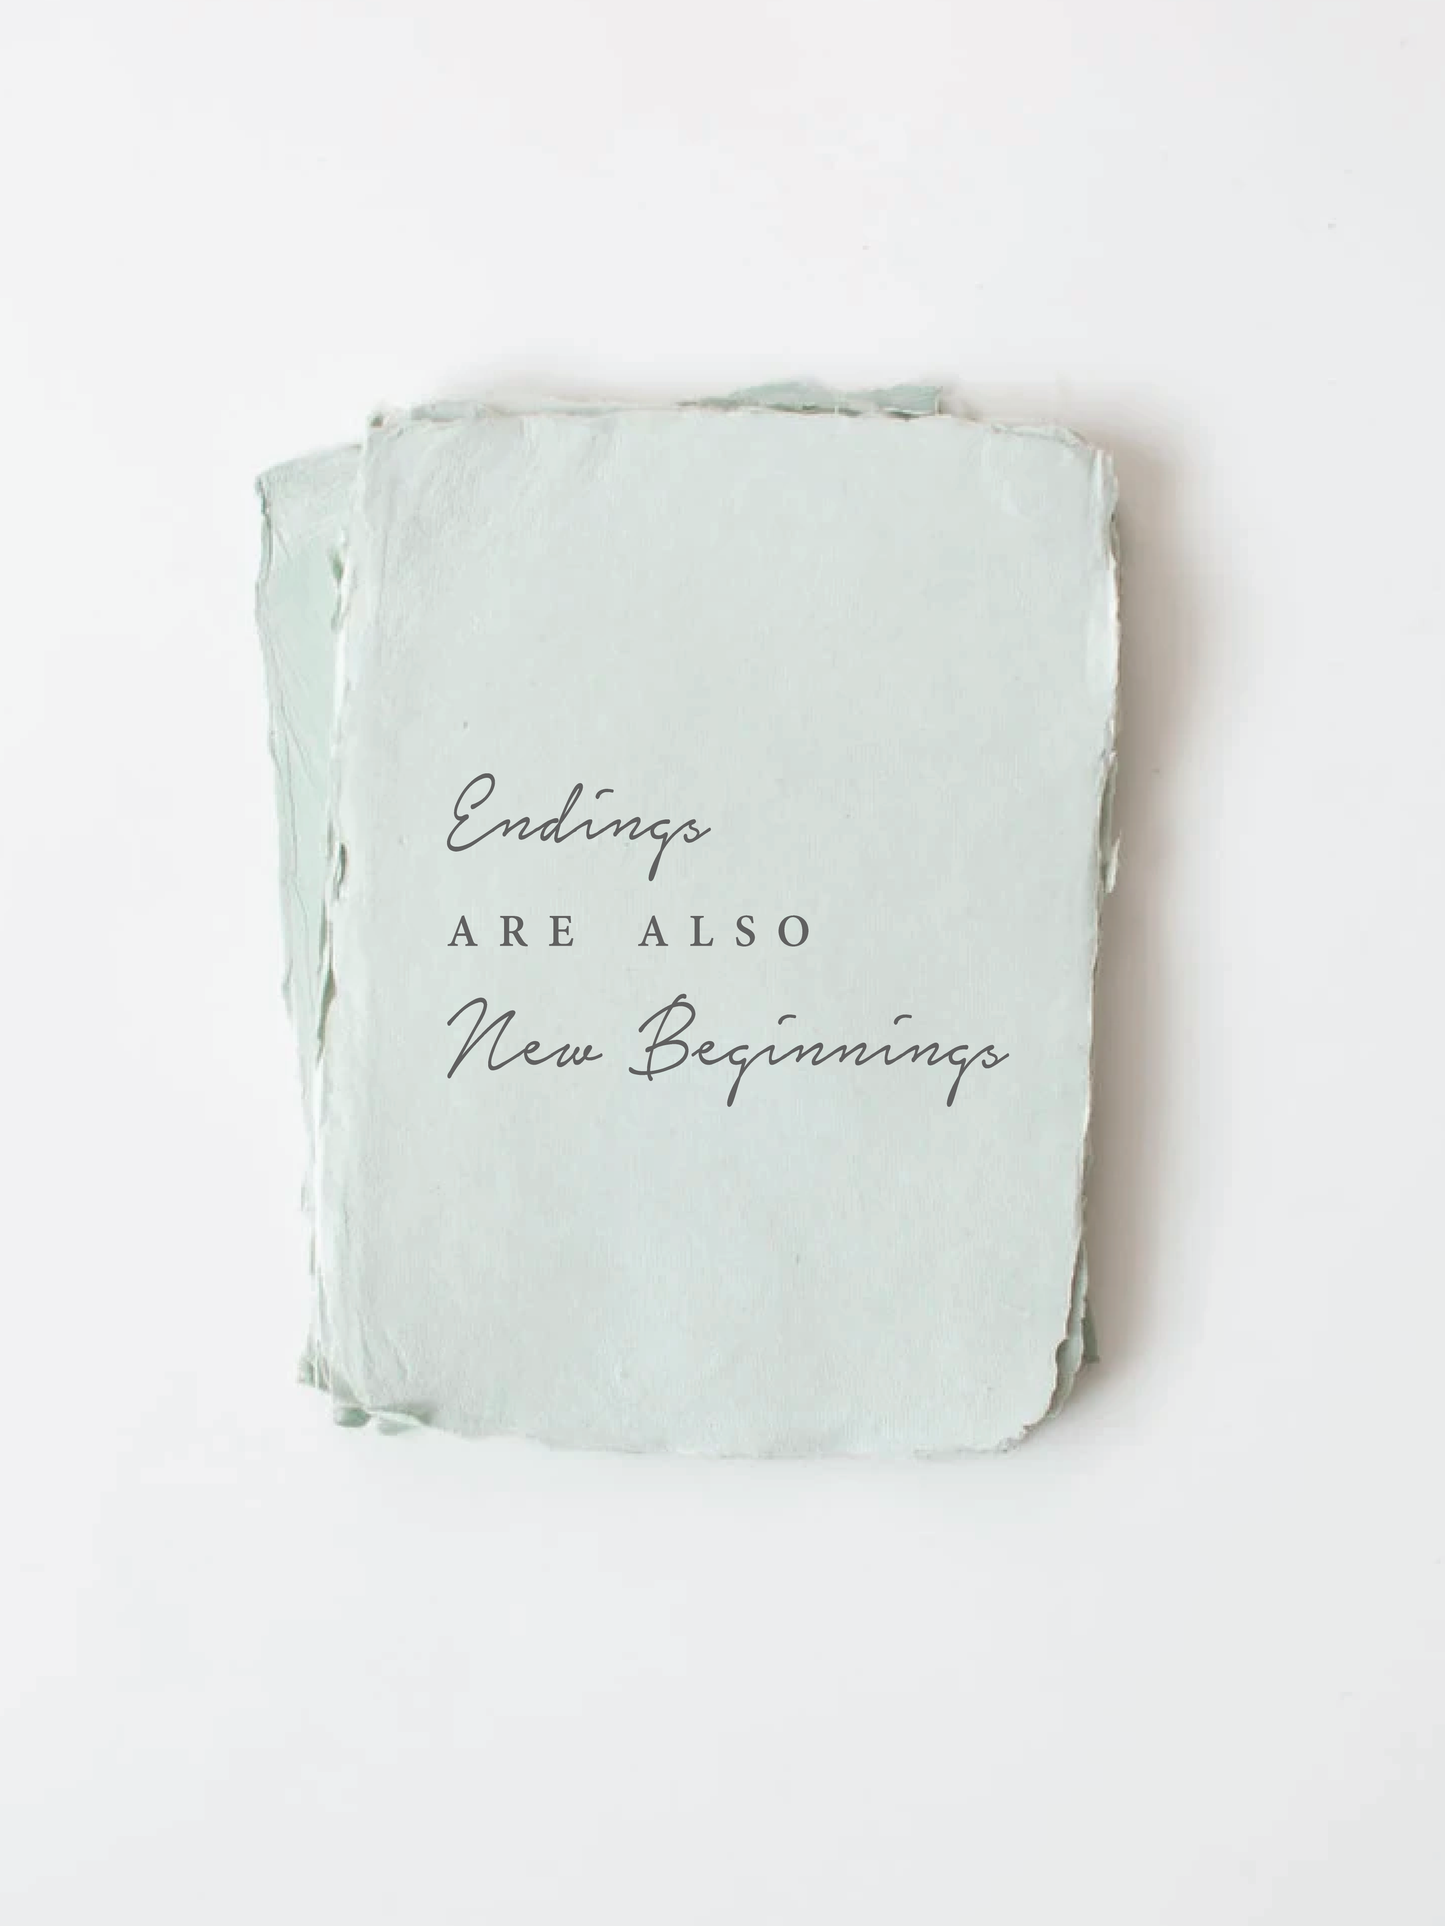 "Endings are also New Beginnings" Encouragement Card